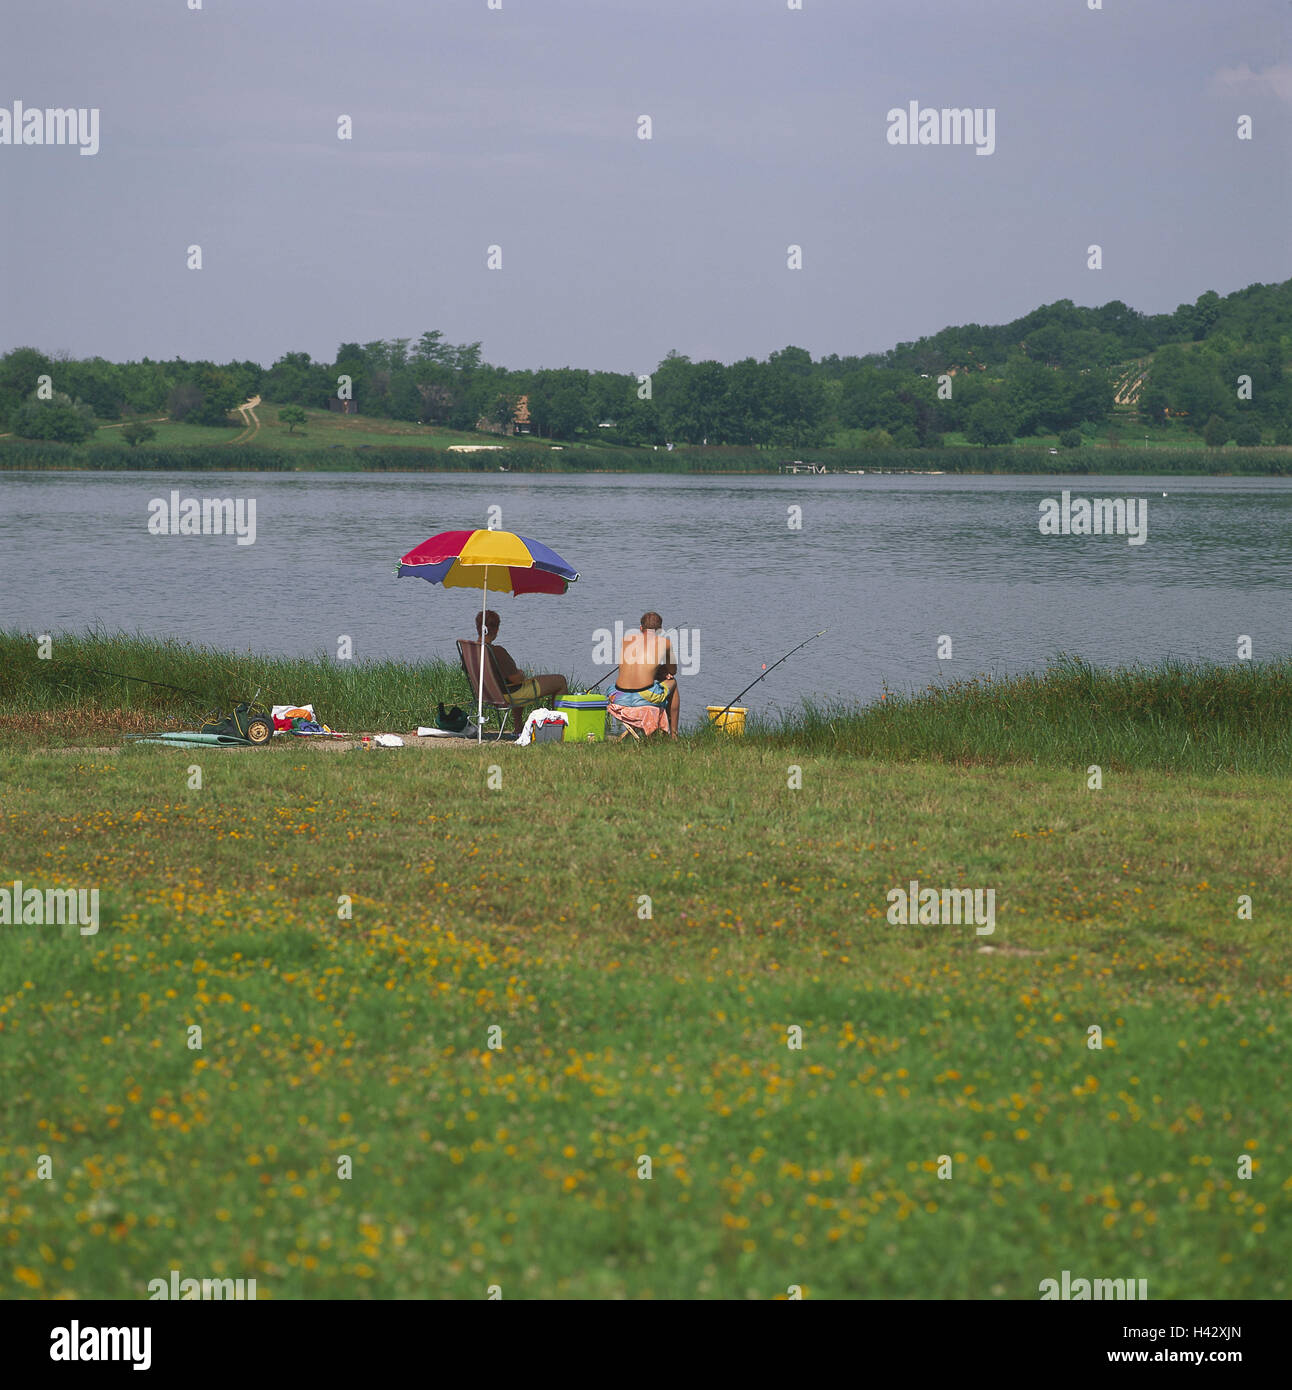 Hungary, Balaton, Tihany, lakeside, angler, back view, Central, Europe, disk lake, popular place for outings, lake, shore, angler, fish, leisure time, leisure activity, view, outside, summer Stock Photo